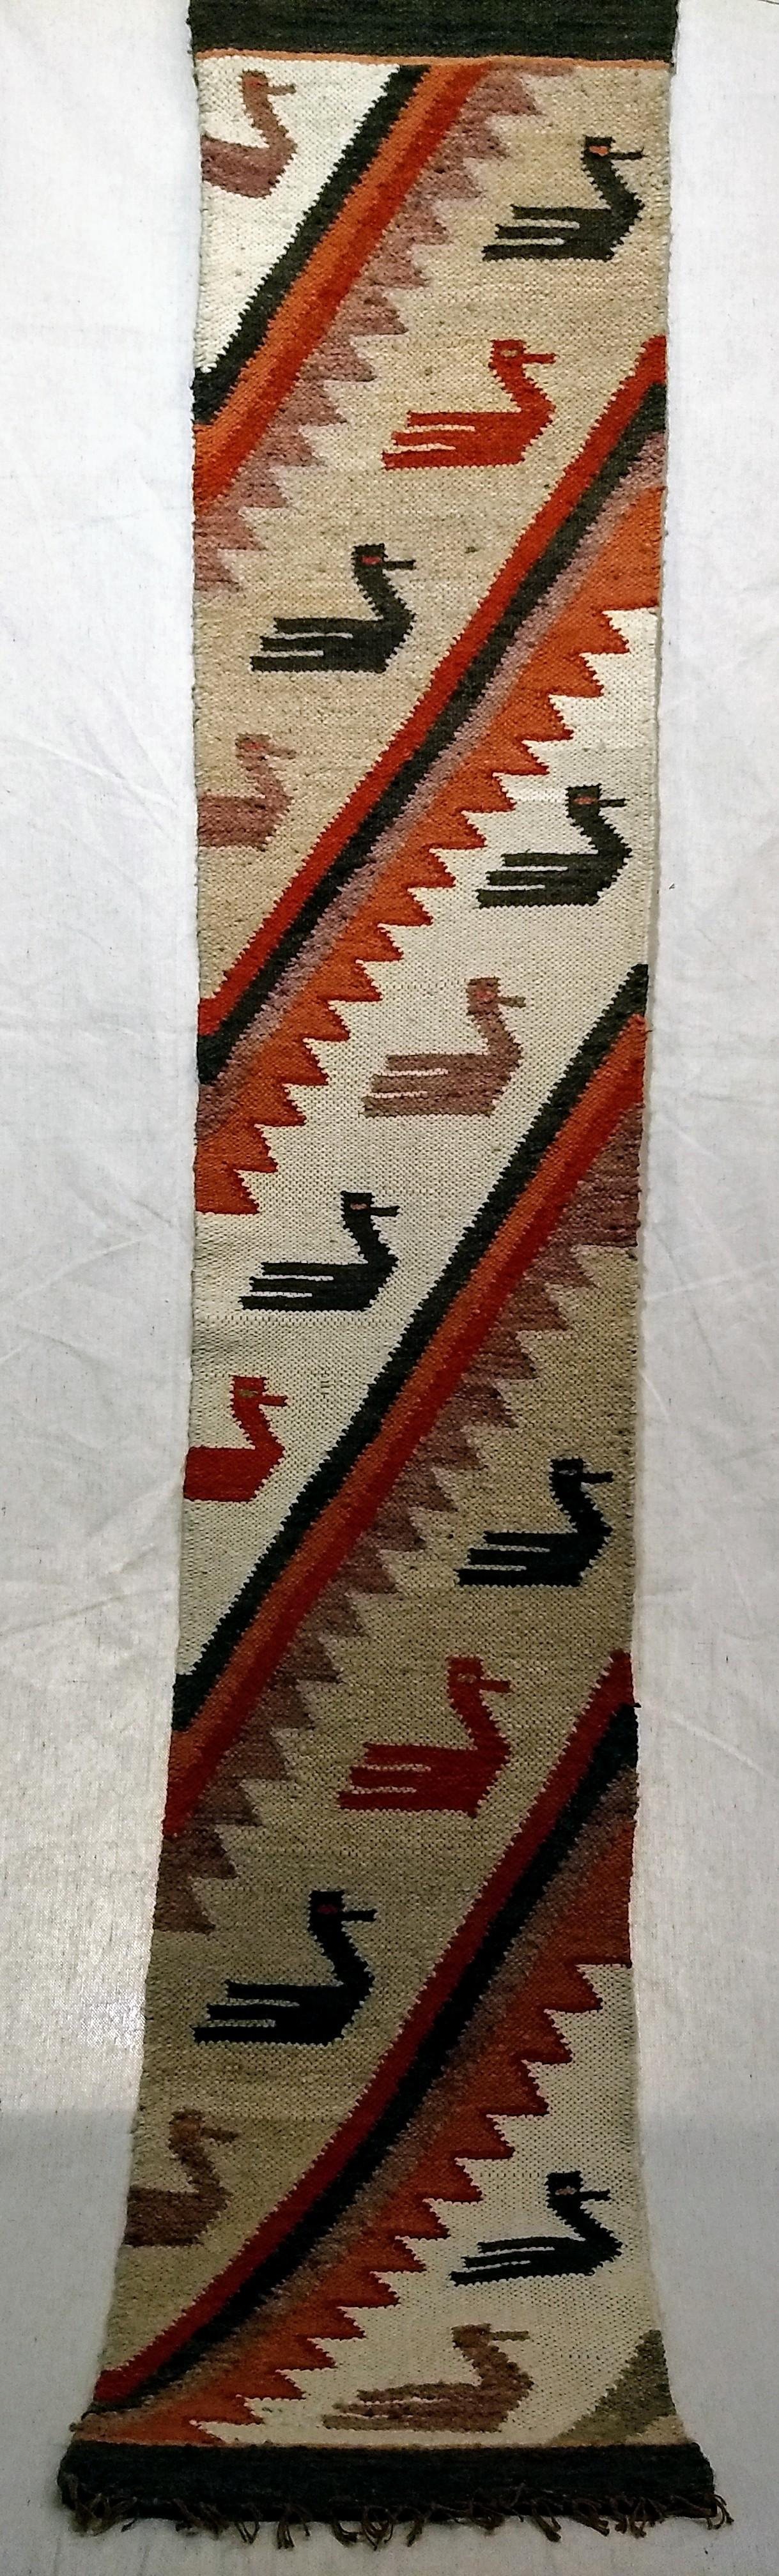 Vintage Native American Navajo Rug Depicting a Column of Birds for Wall Art a Table Runner.  The beautiful Navajo rug from the Southwest Area of America has a very unique design of birds woven into a stripes pattern. The Navajo rug has been adapted